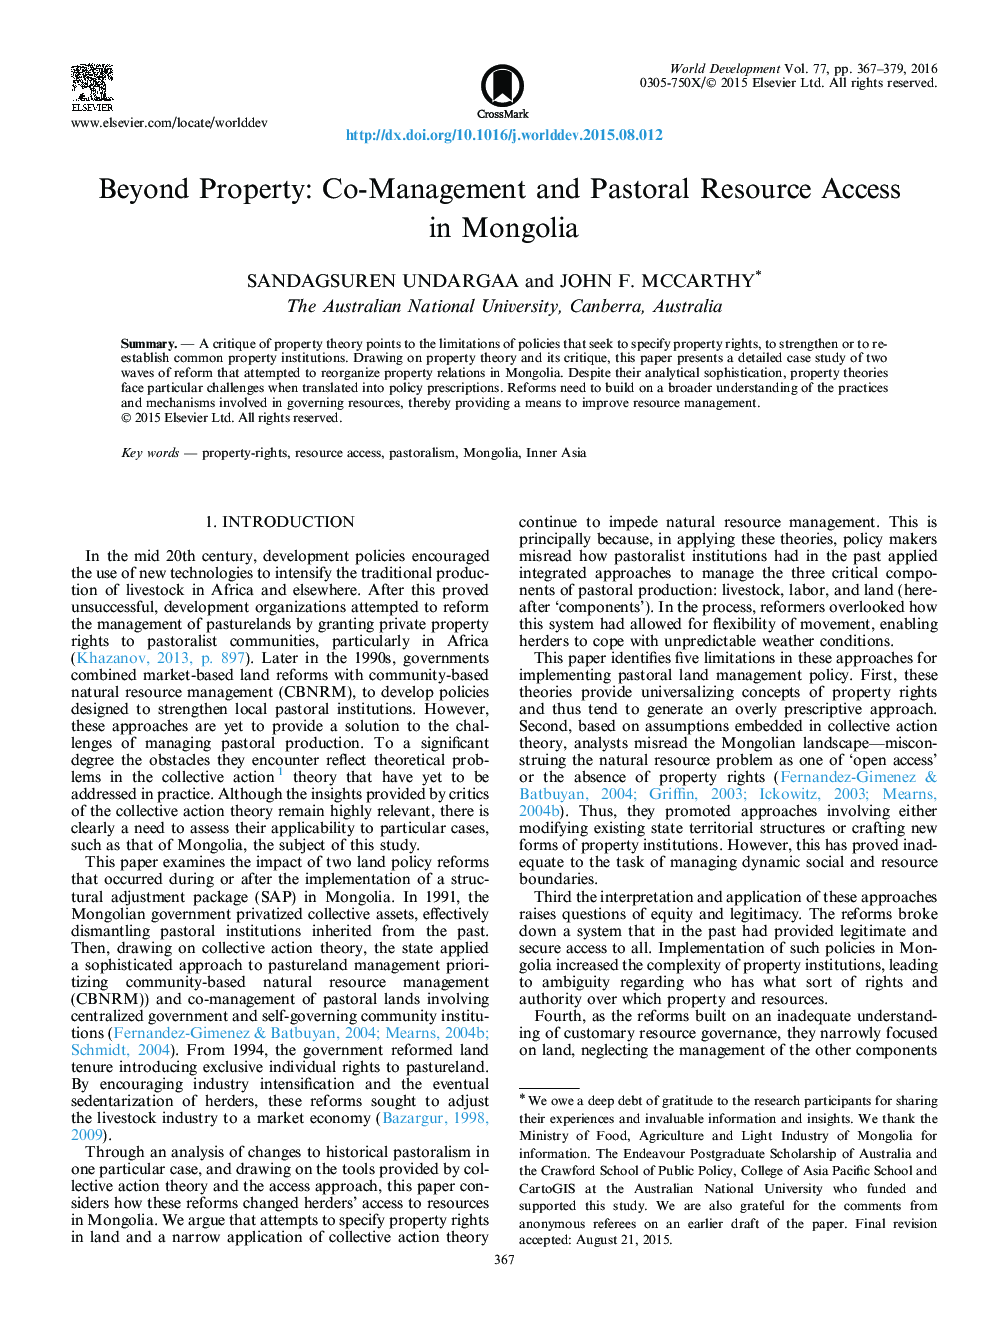 Beyond Property: Co-Management and Pastoral Resource Access in Mongolia